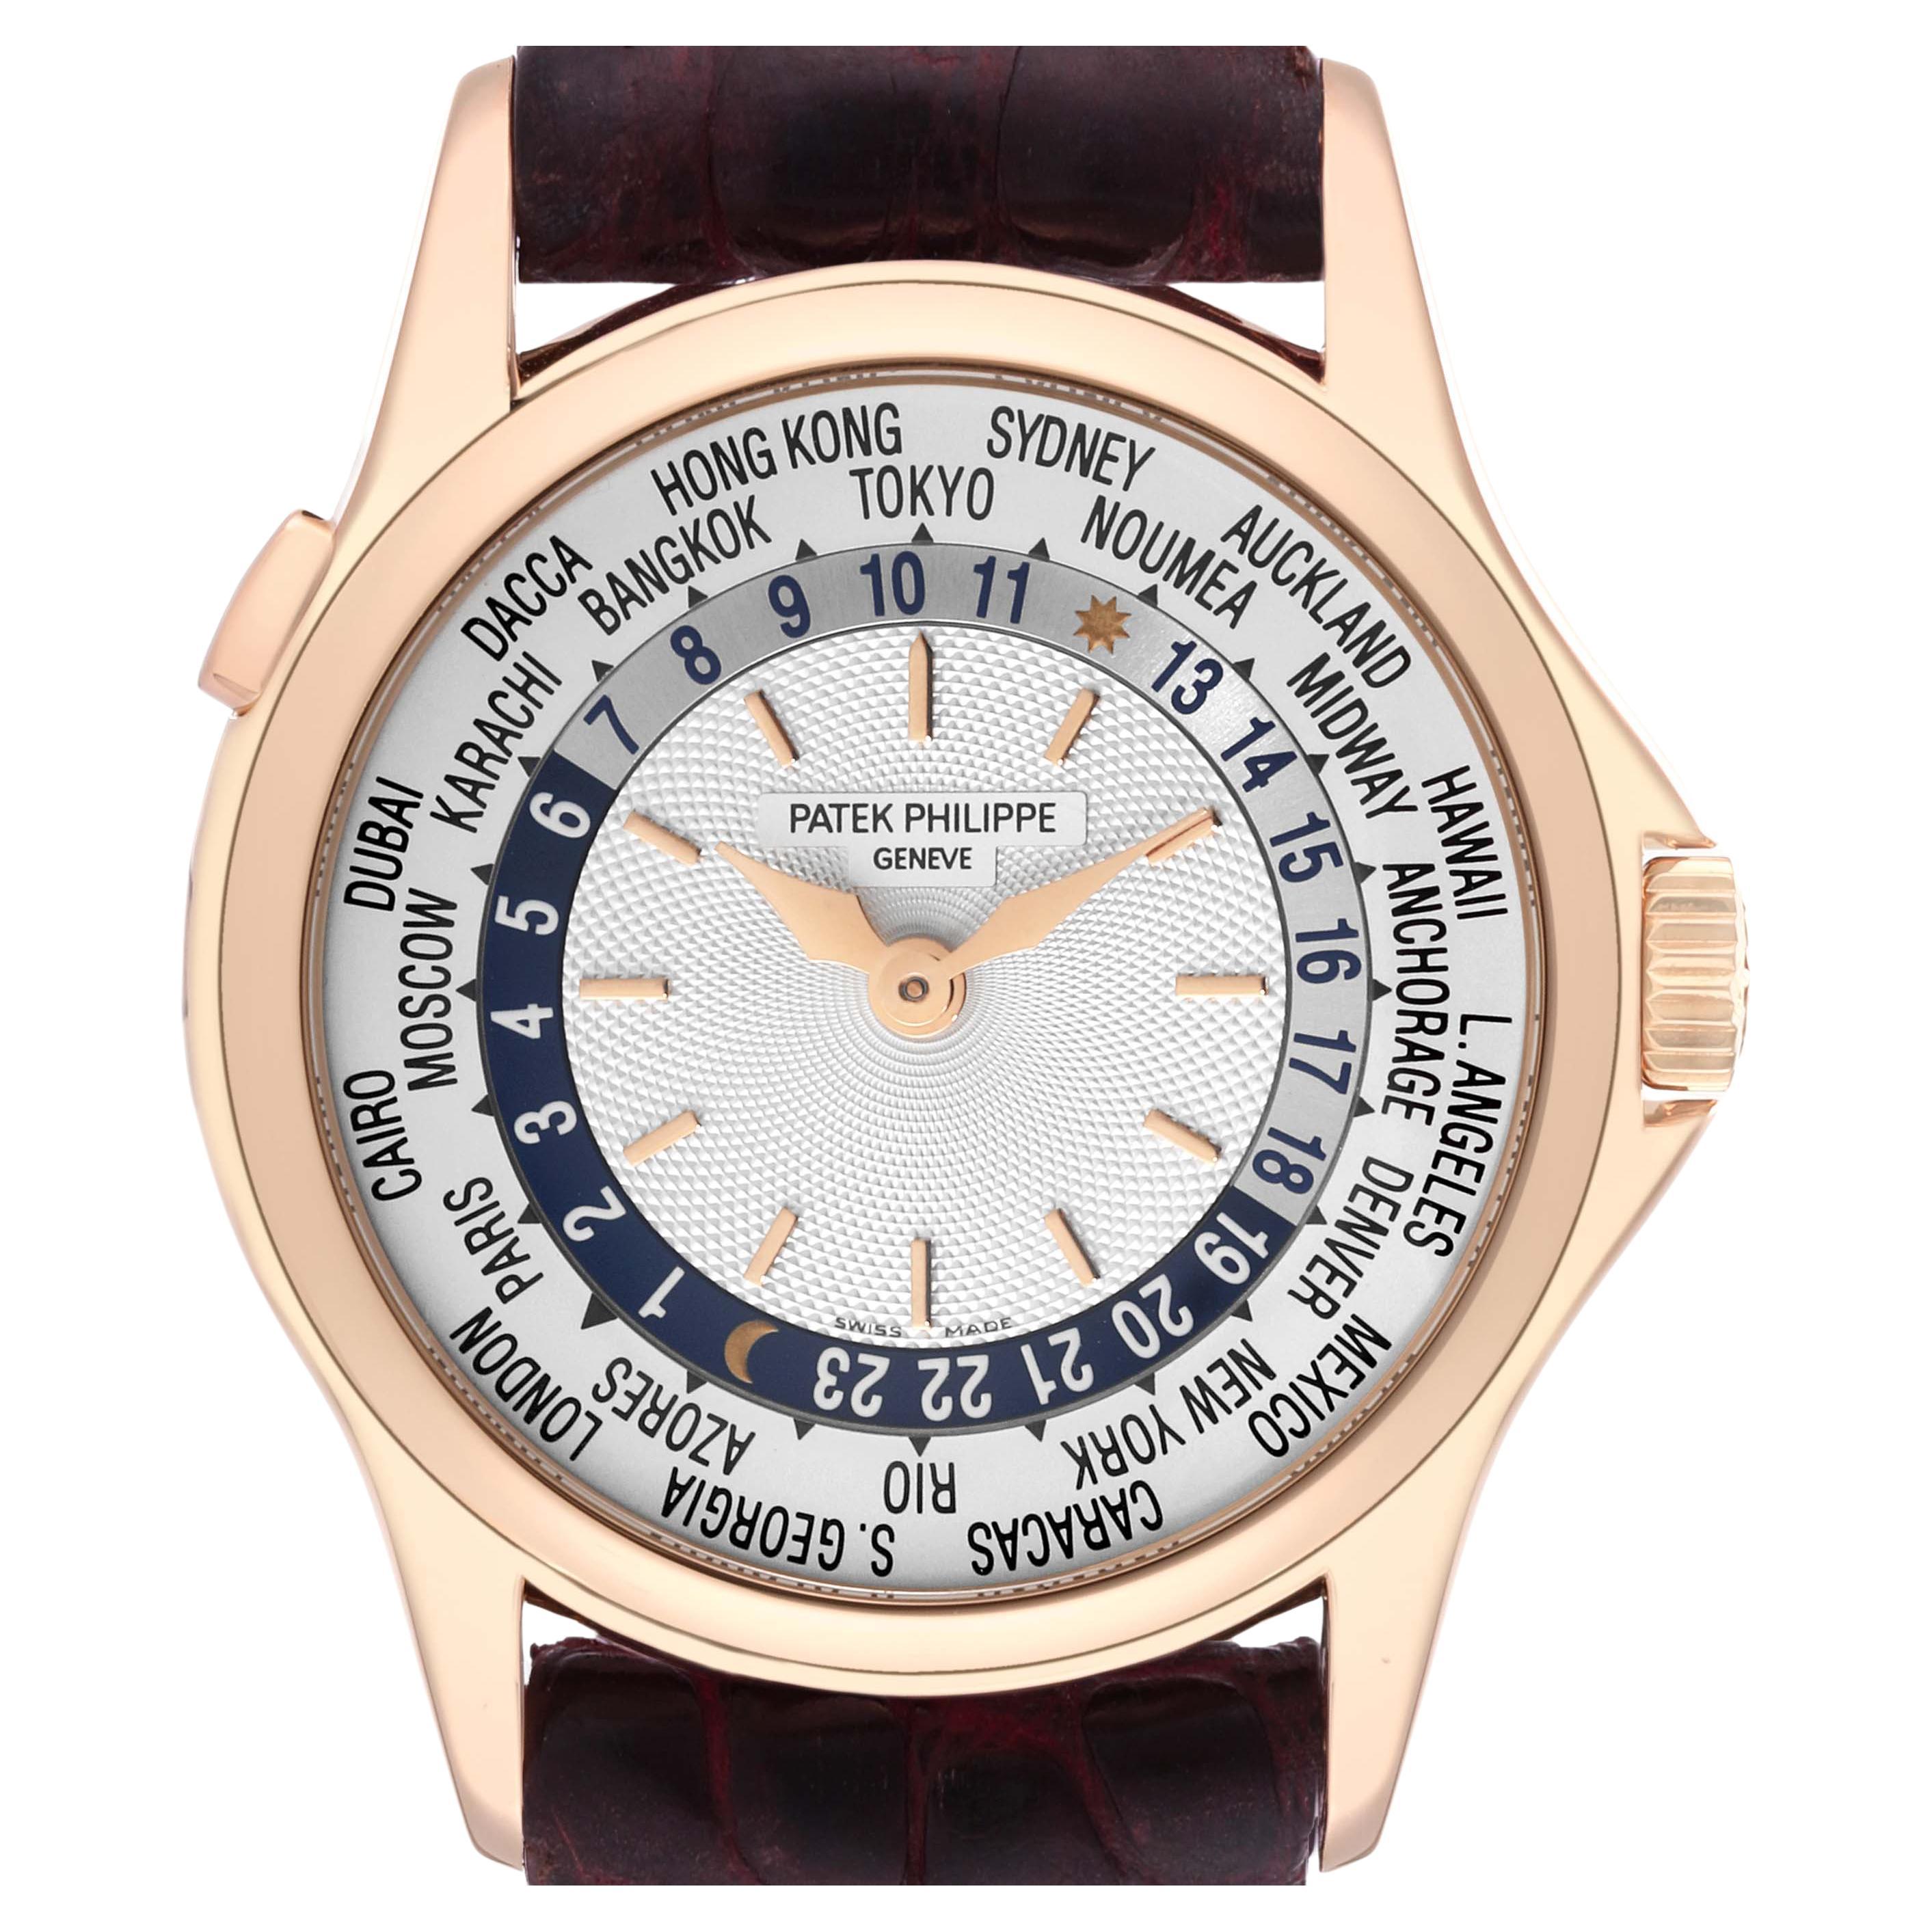 Patek Philippe World Time Automatic Silver Dial Rose Gold Mens Watch 5110 en vente